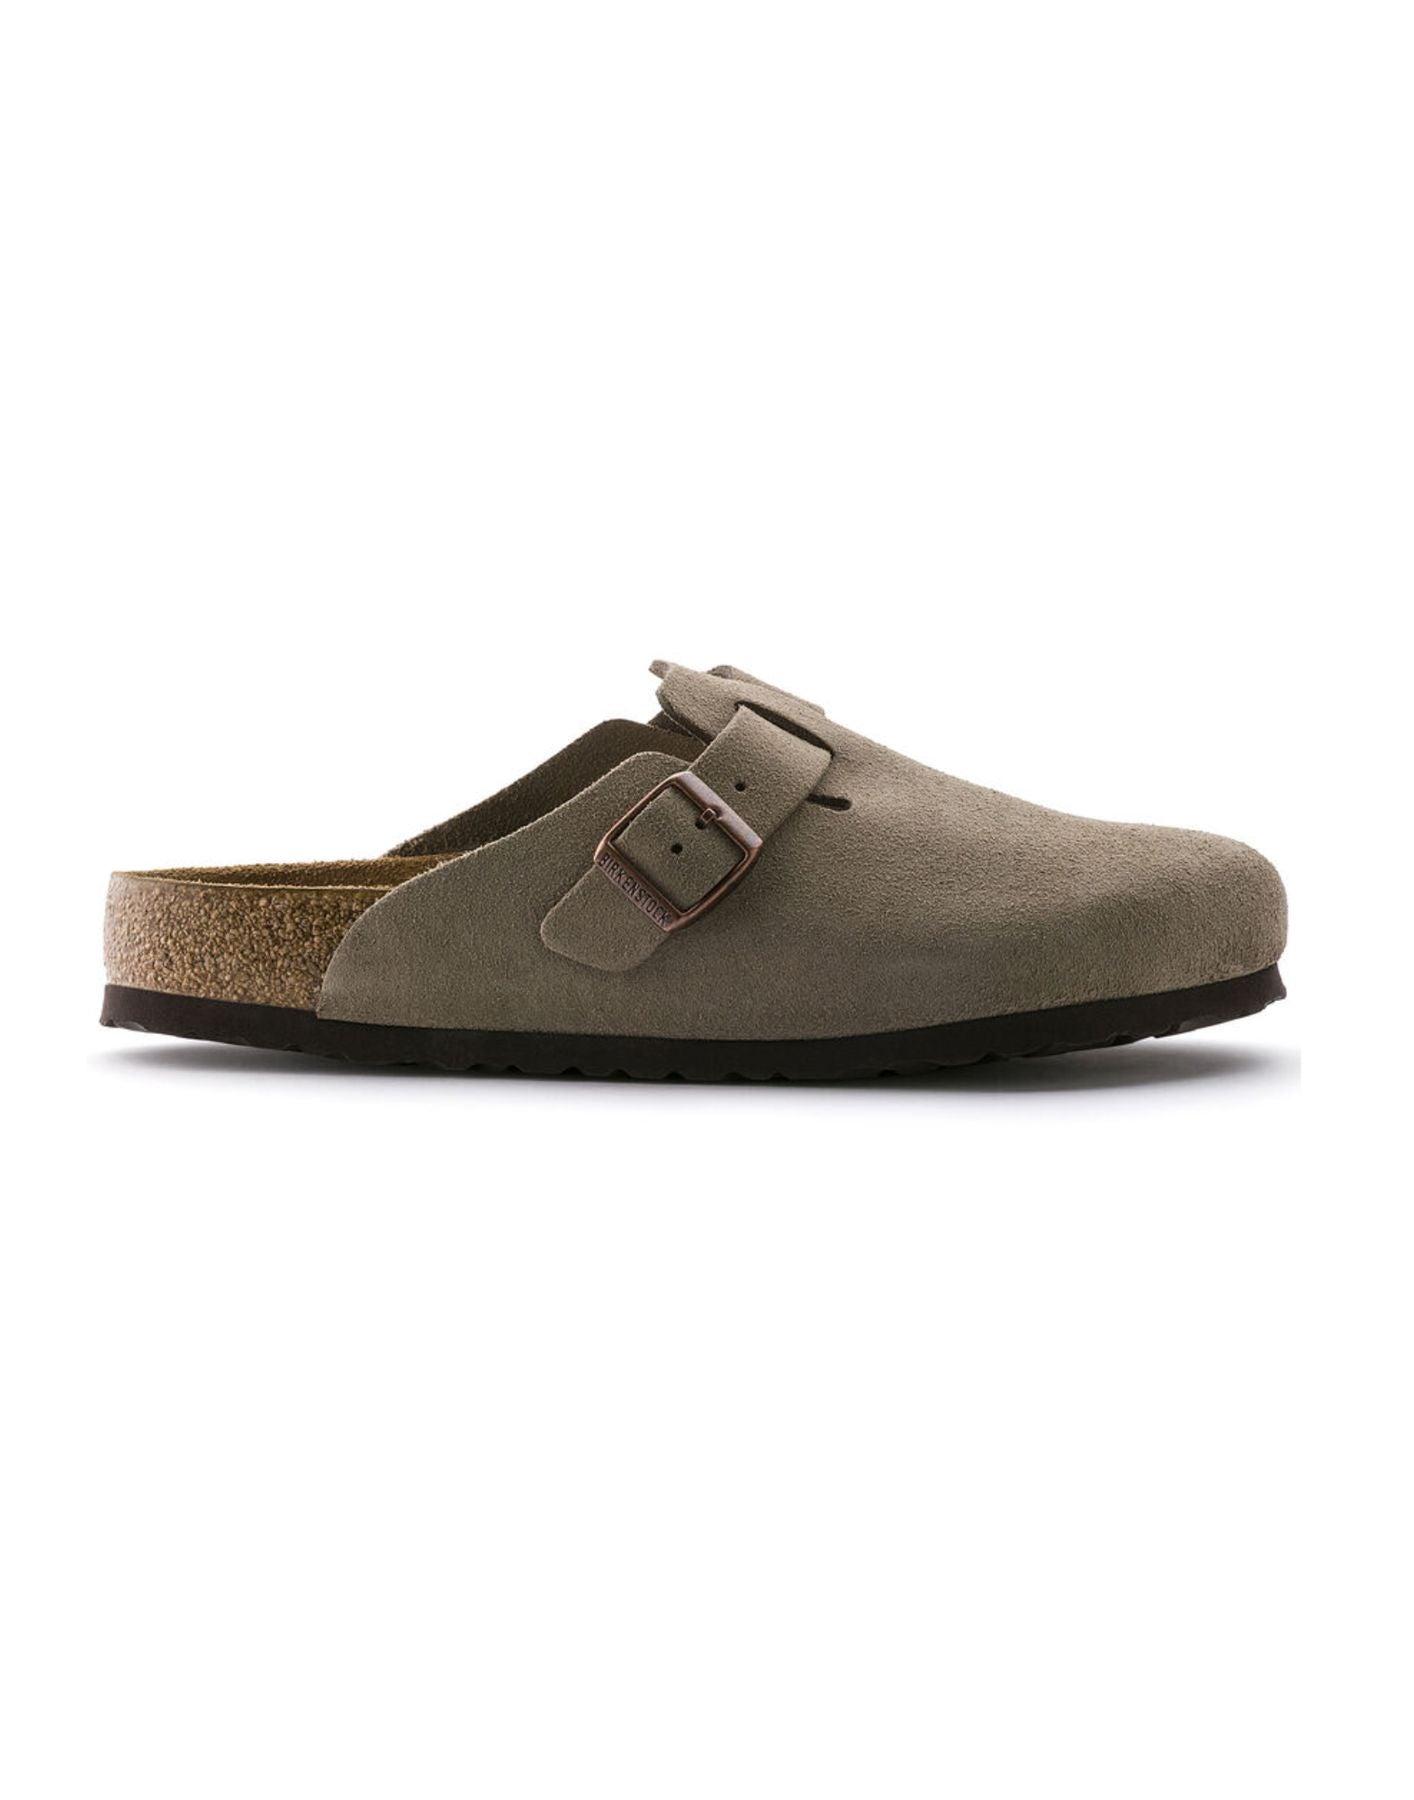 Shoes for man 0560773 M TAUPE BOSTON BIRKENSTOCK